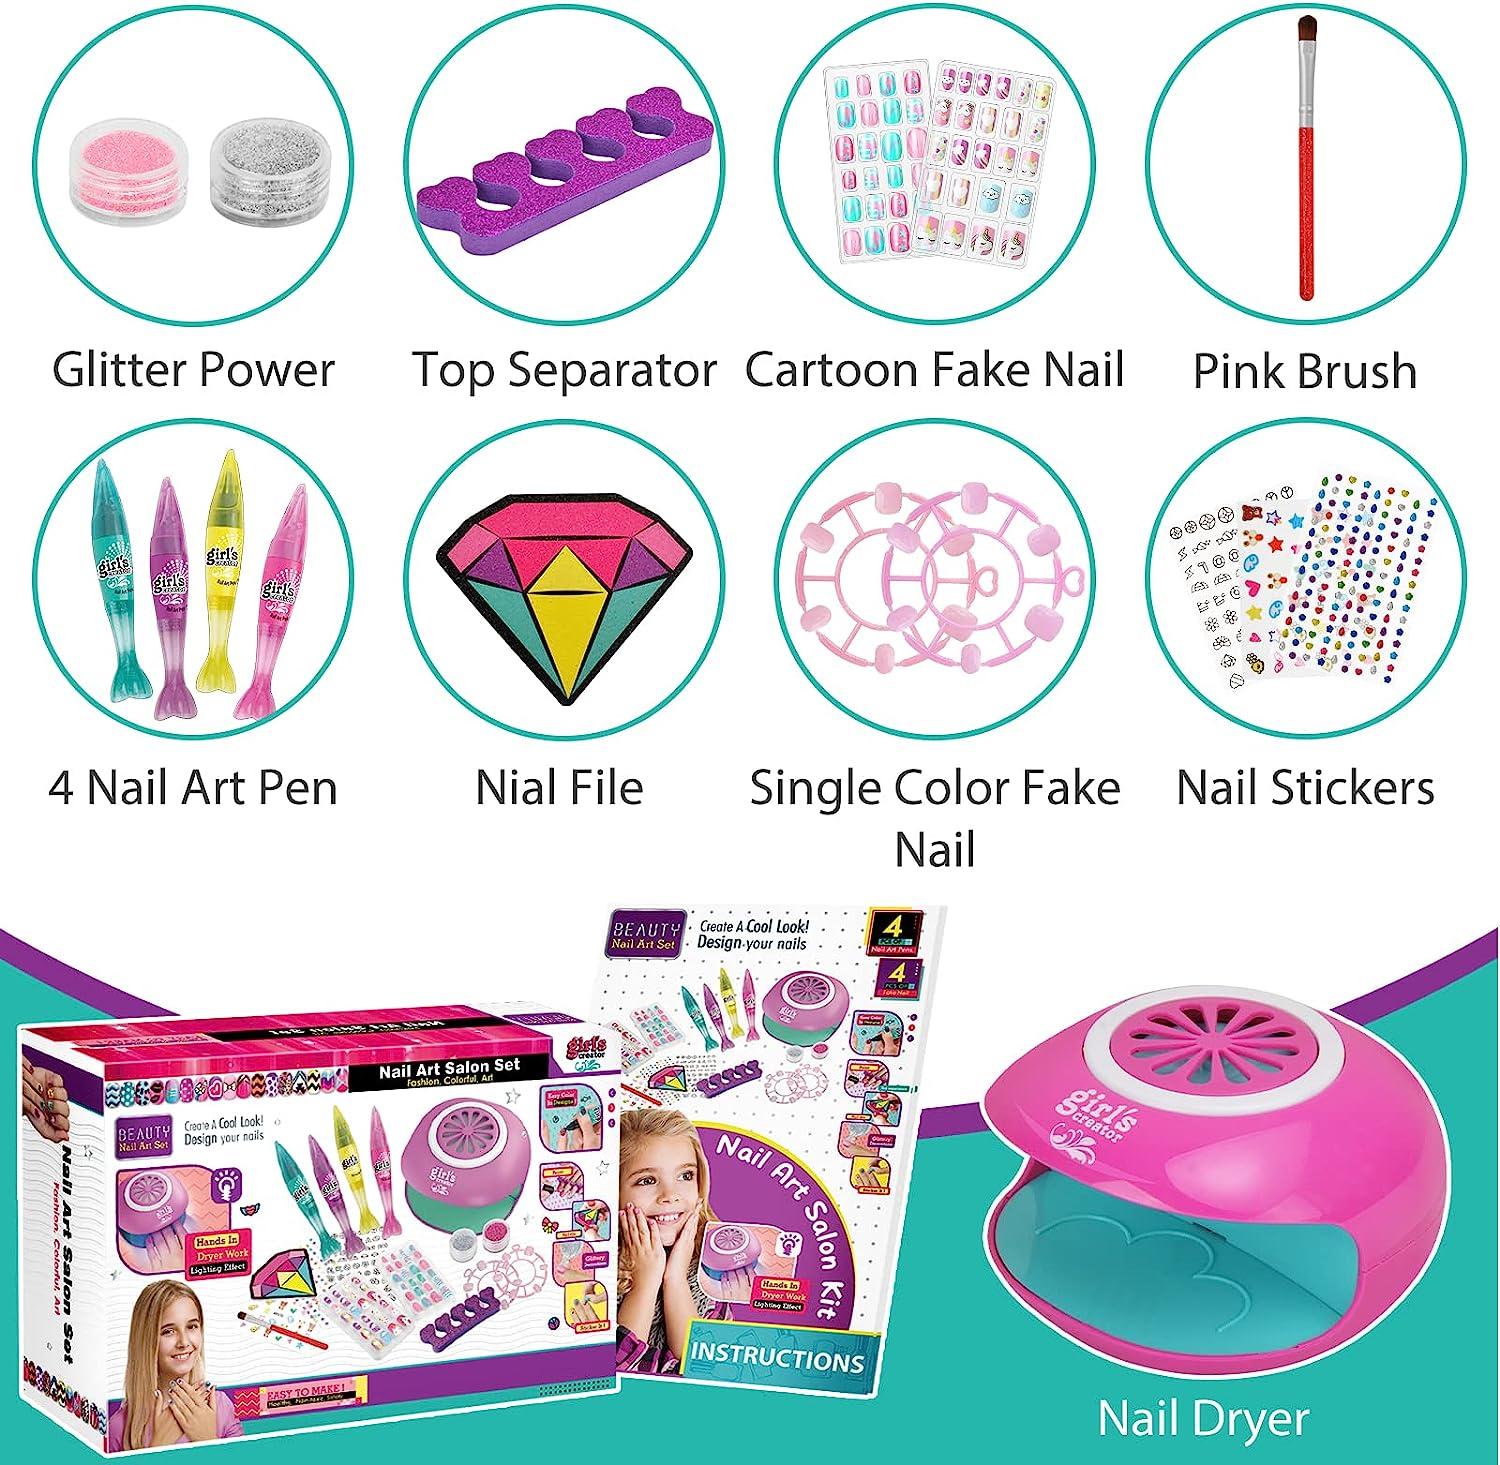 Nail Polish, Nail Art Studio Manicure Set For Girls Art Kit with 12  Artificial Nails, Nail Dotting Pen, Tools and Glitters Birthday Gift for Little  Girls - 15 pcs.